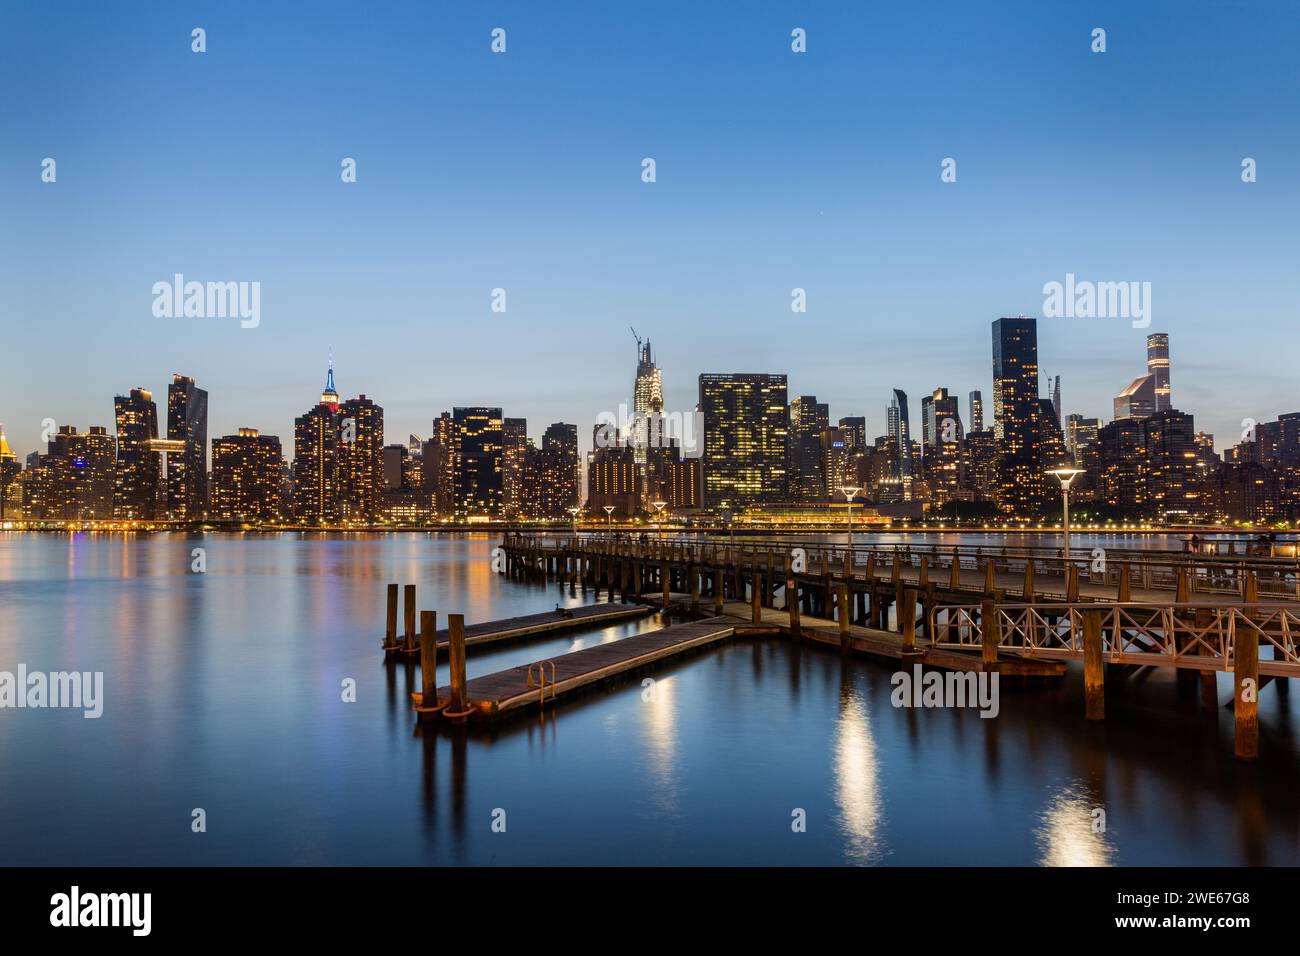 A midtown Manhattan and East River view from Long Island city at dusk long exposure Stock Photo